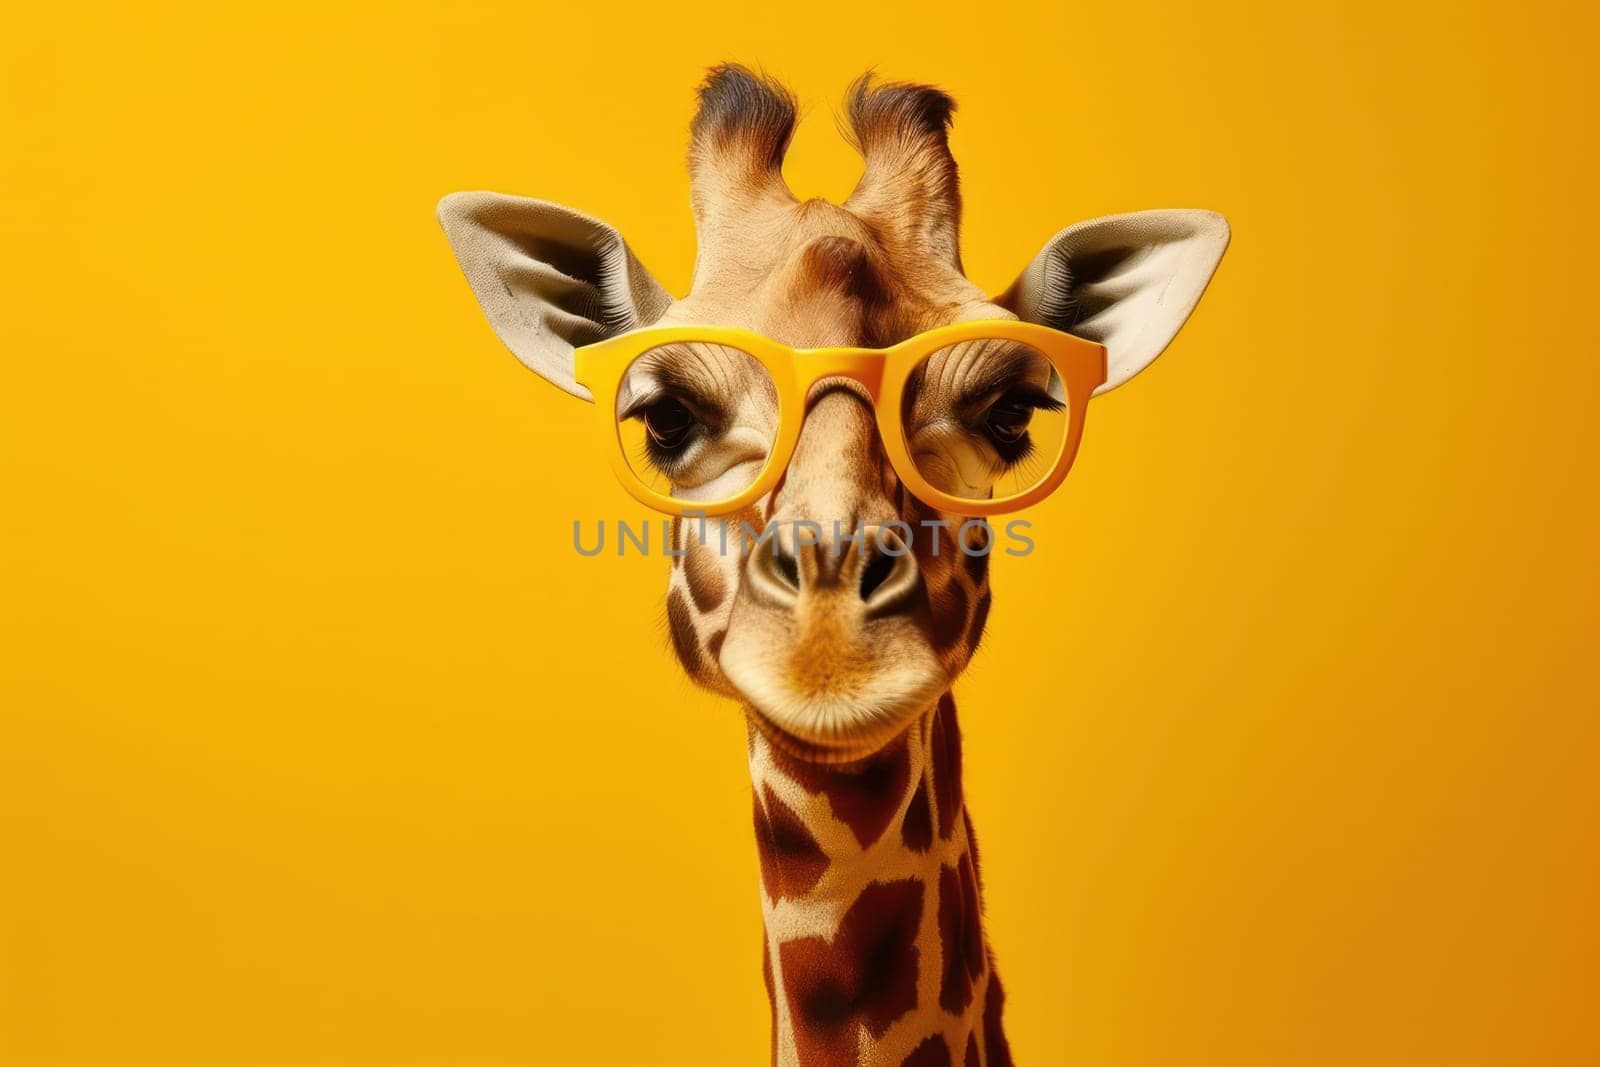 fauna and flora of Africa with this stunning giraffe in sunglasses by Sorapop